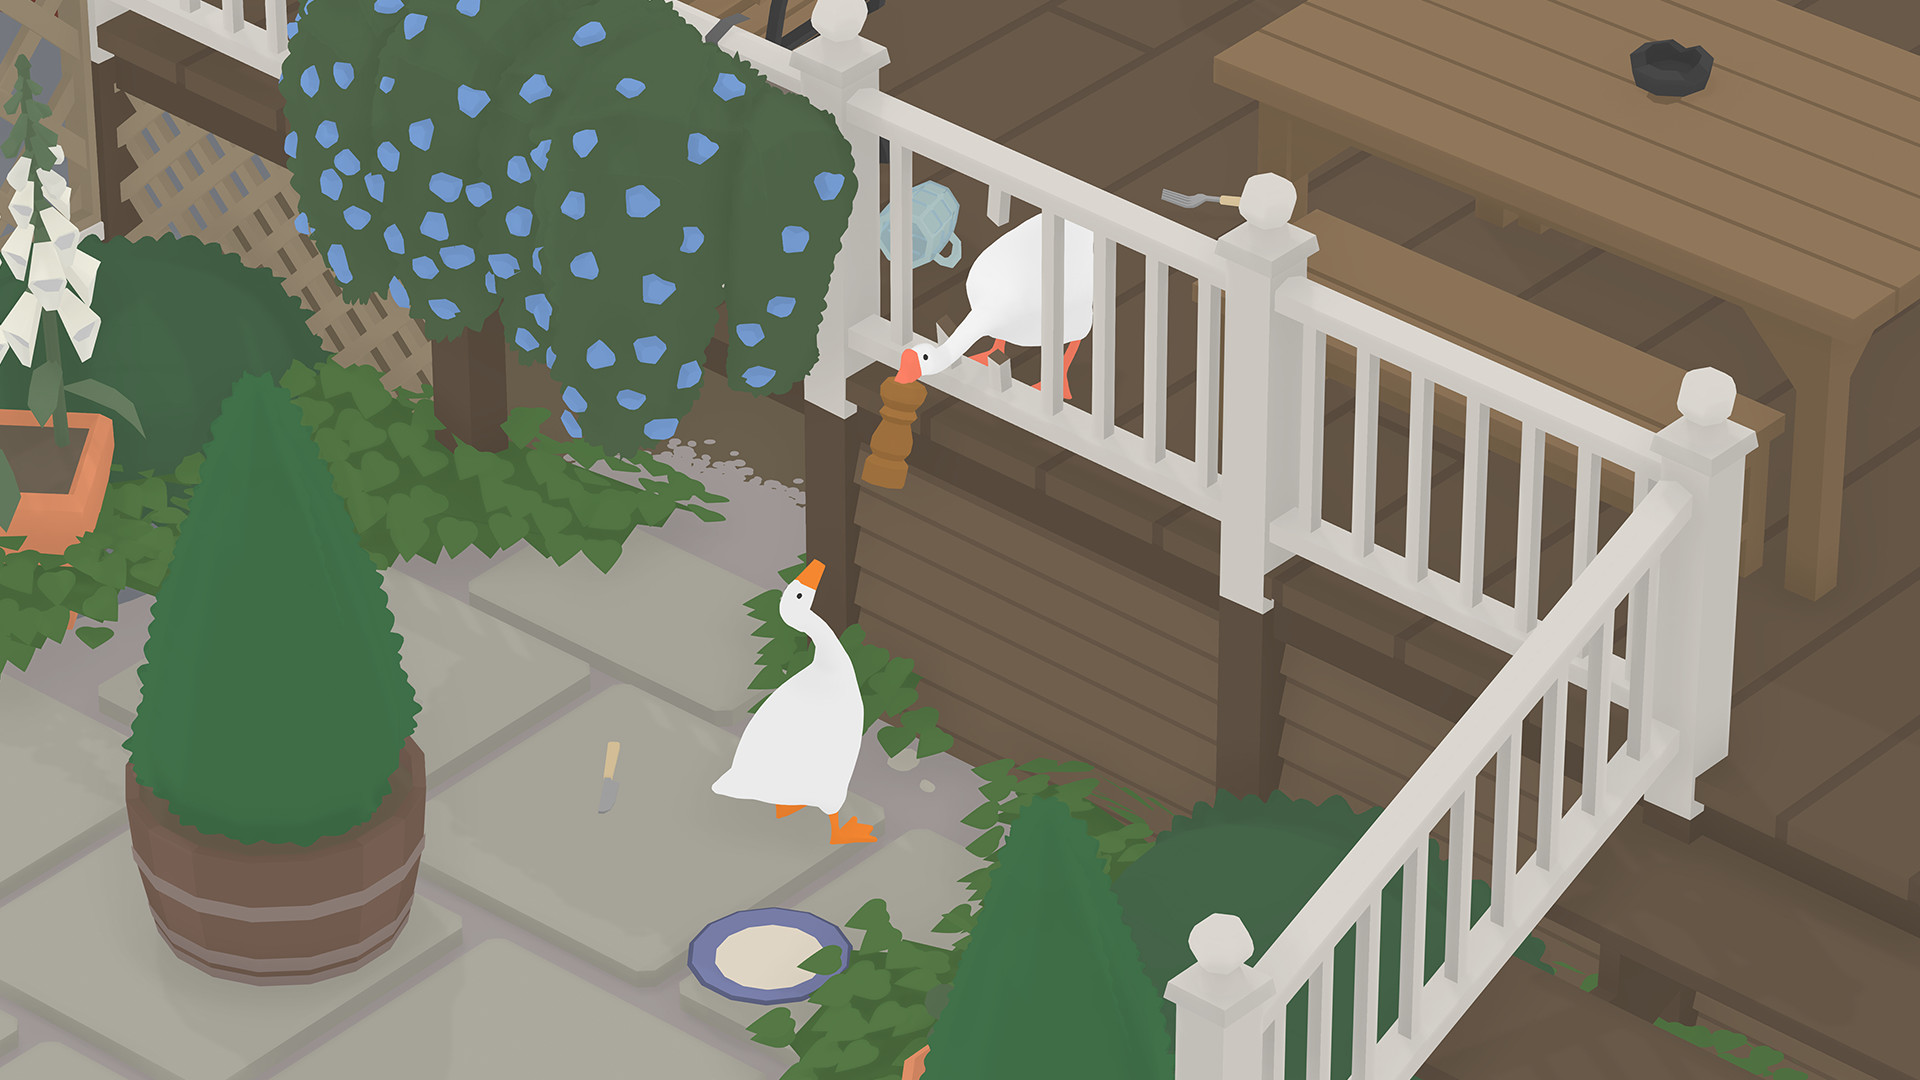 Untitled Goose Game On Steam